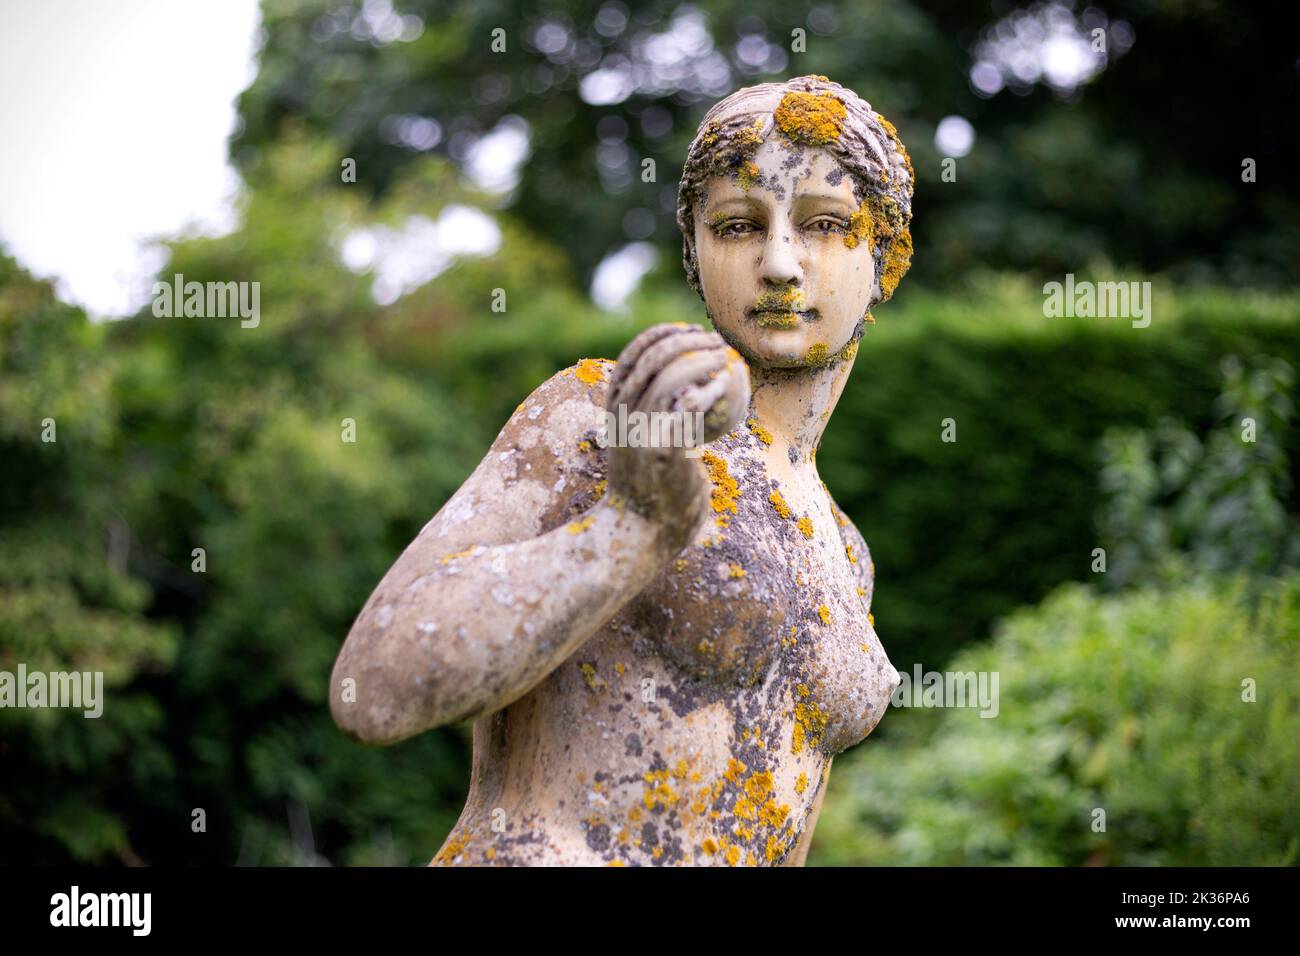 A statue in the grounds of Crook Hall and Gardens in County Durham.Crook Hall and Gardens closed in 2020 and the former owners approached the National Stock Photo